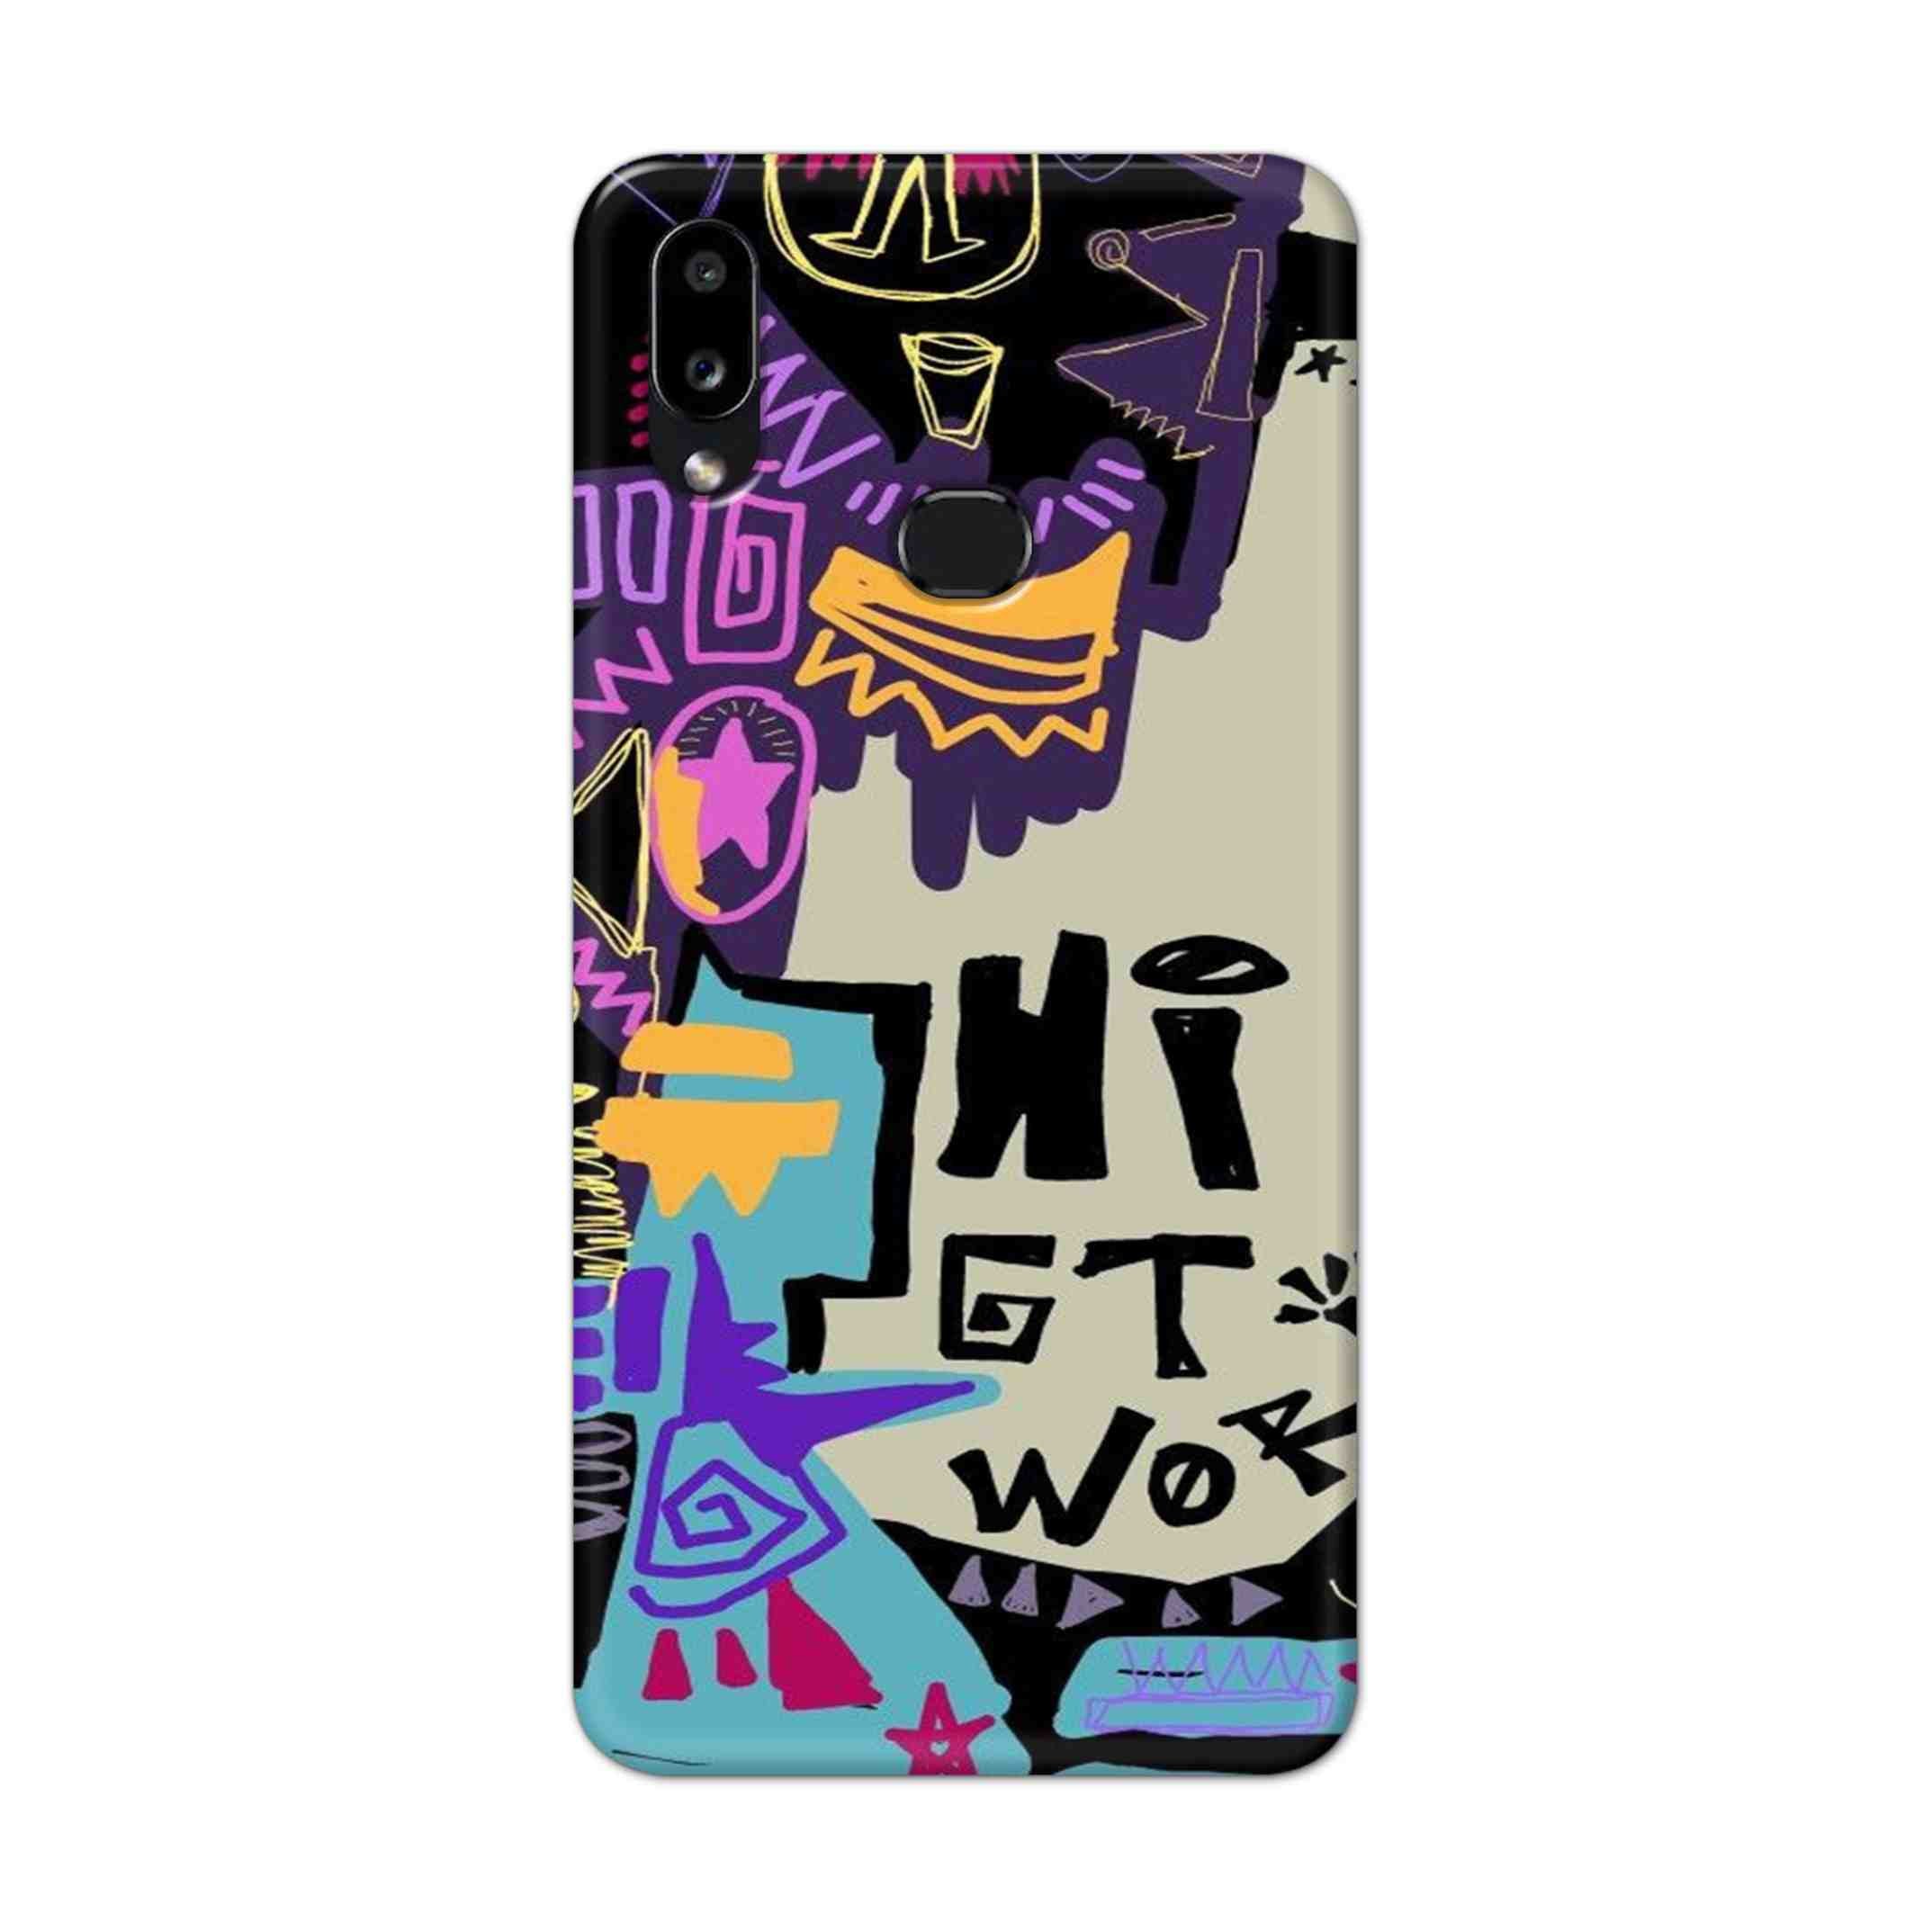 Buy Hi Gt World Hard Back Mobile Phone Case Cover For Samsung Galaxy M01s Online